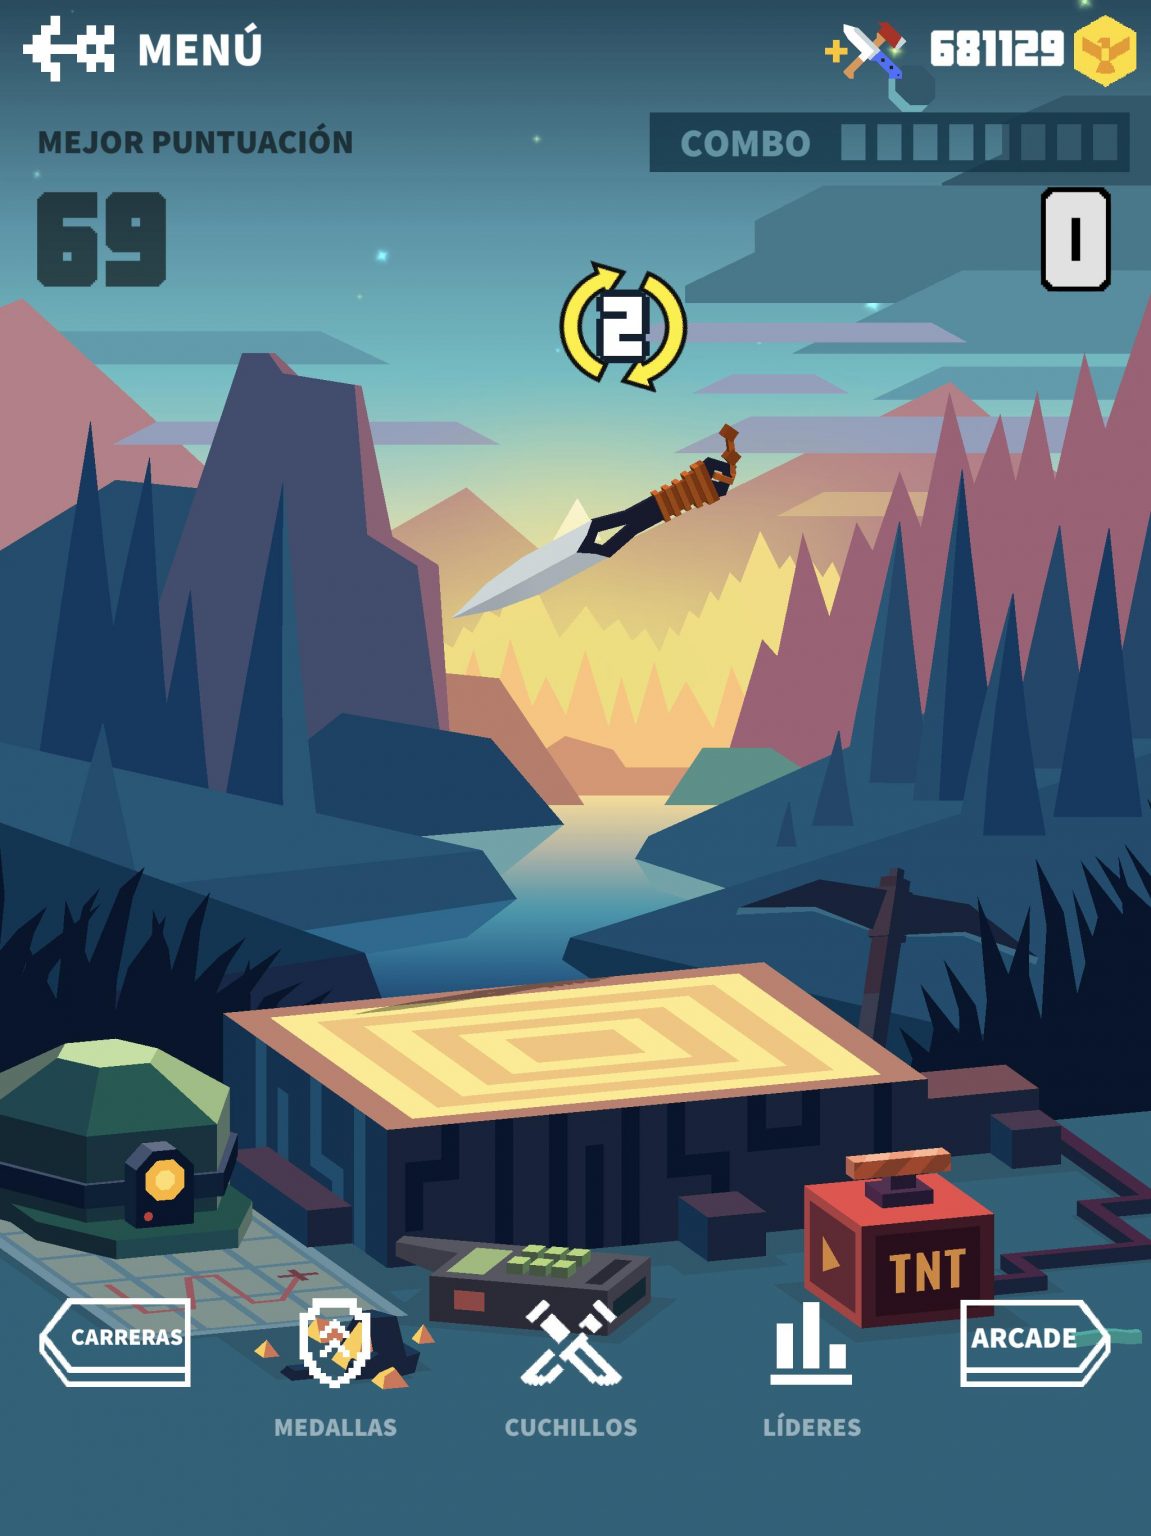 Knife Hit - Flippy Knife Throw download the last version for windows